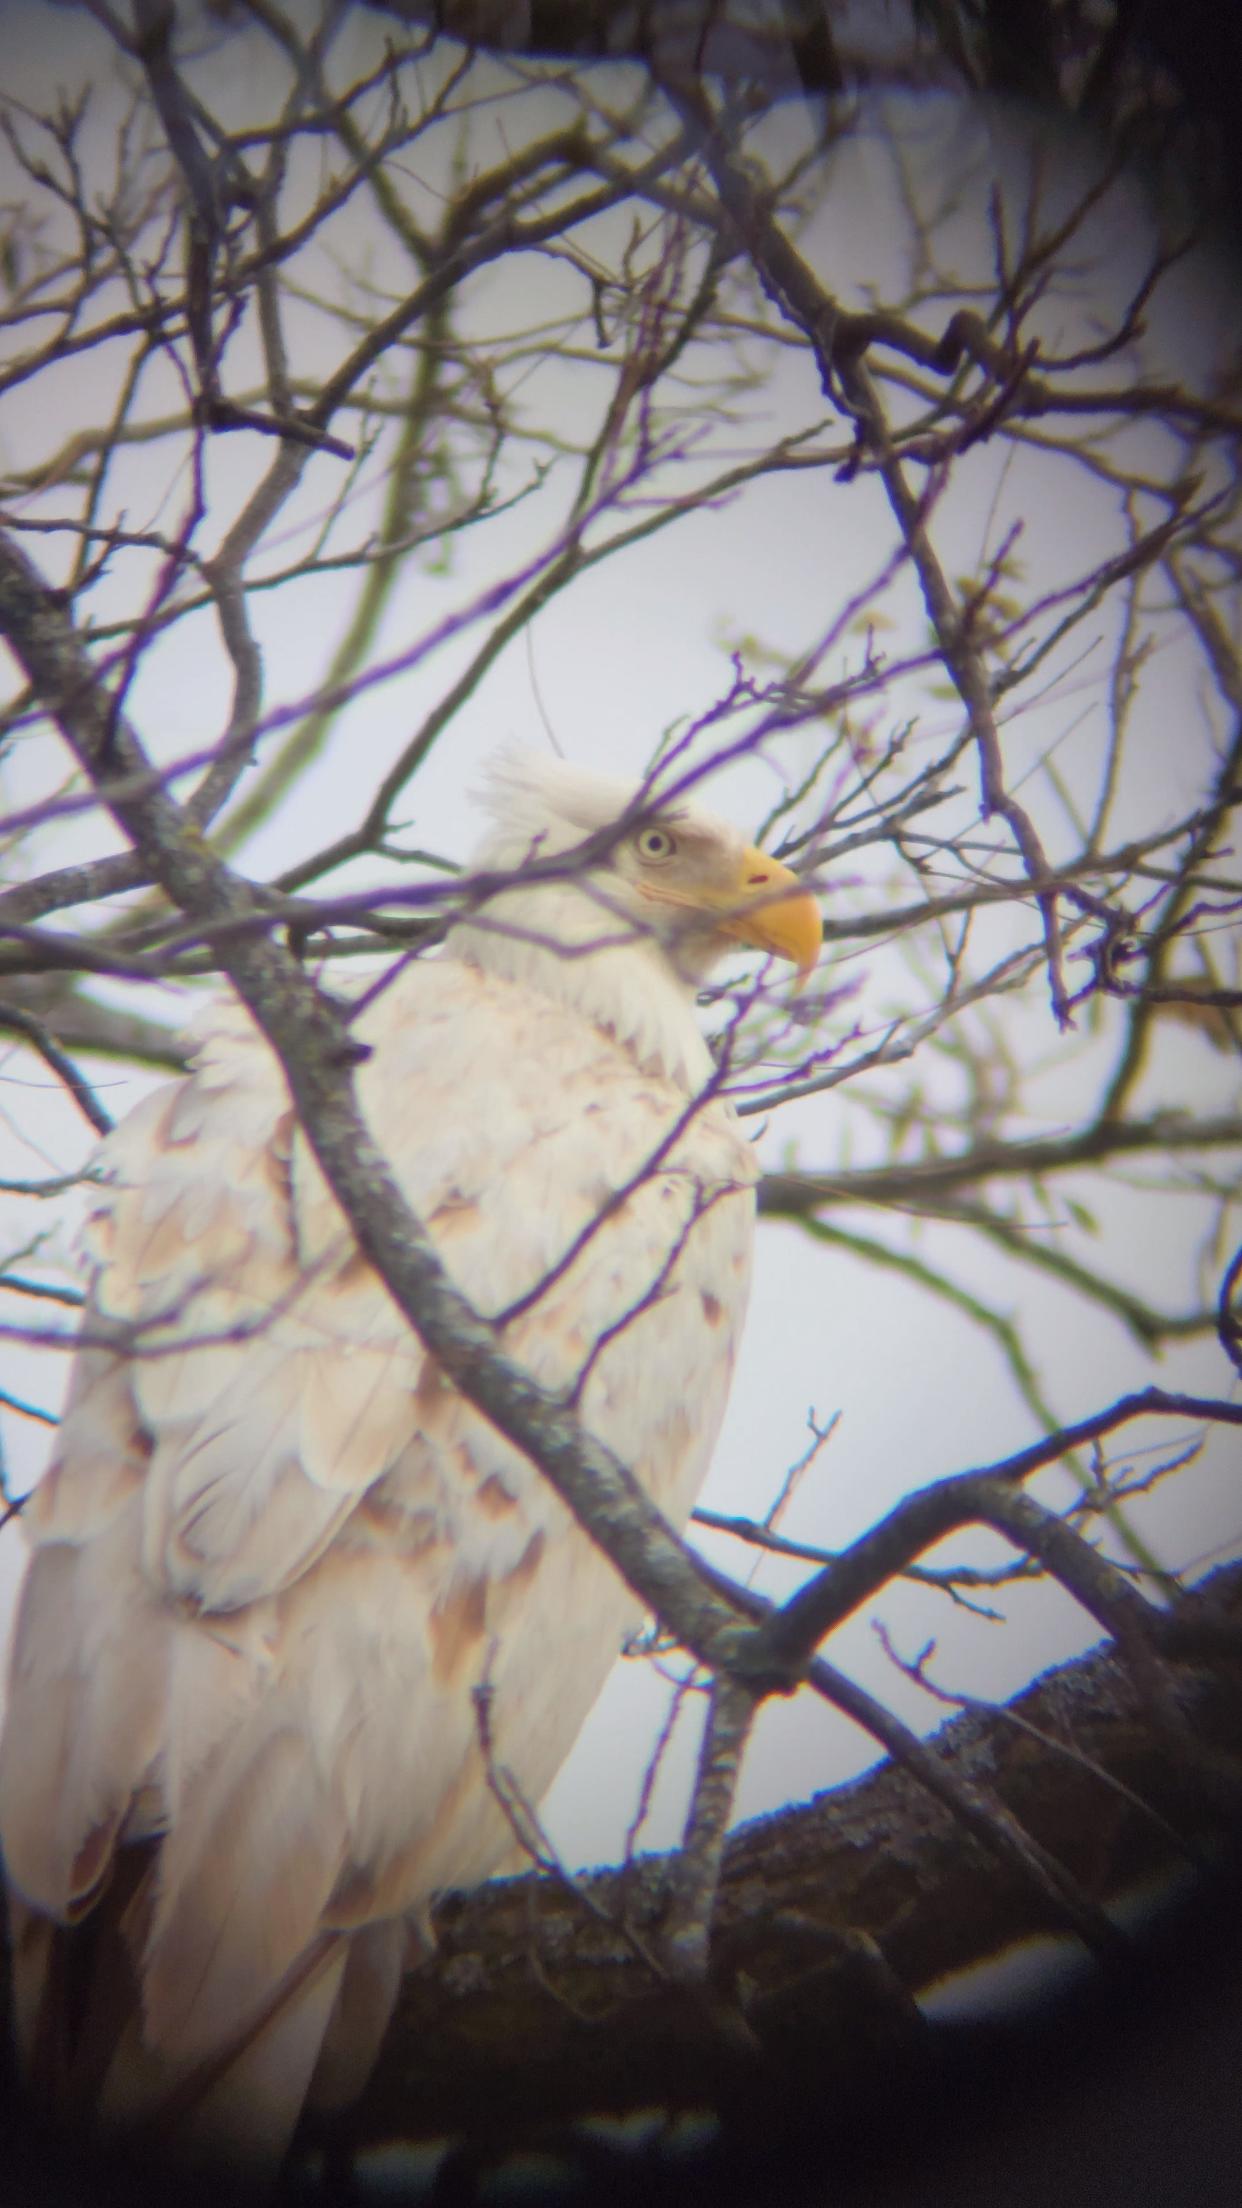 Justin Briley captured photos of the bird using his phone camera and spotting scope.